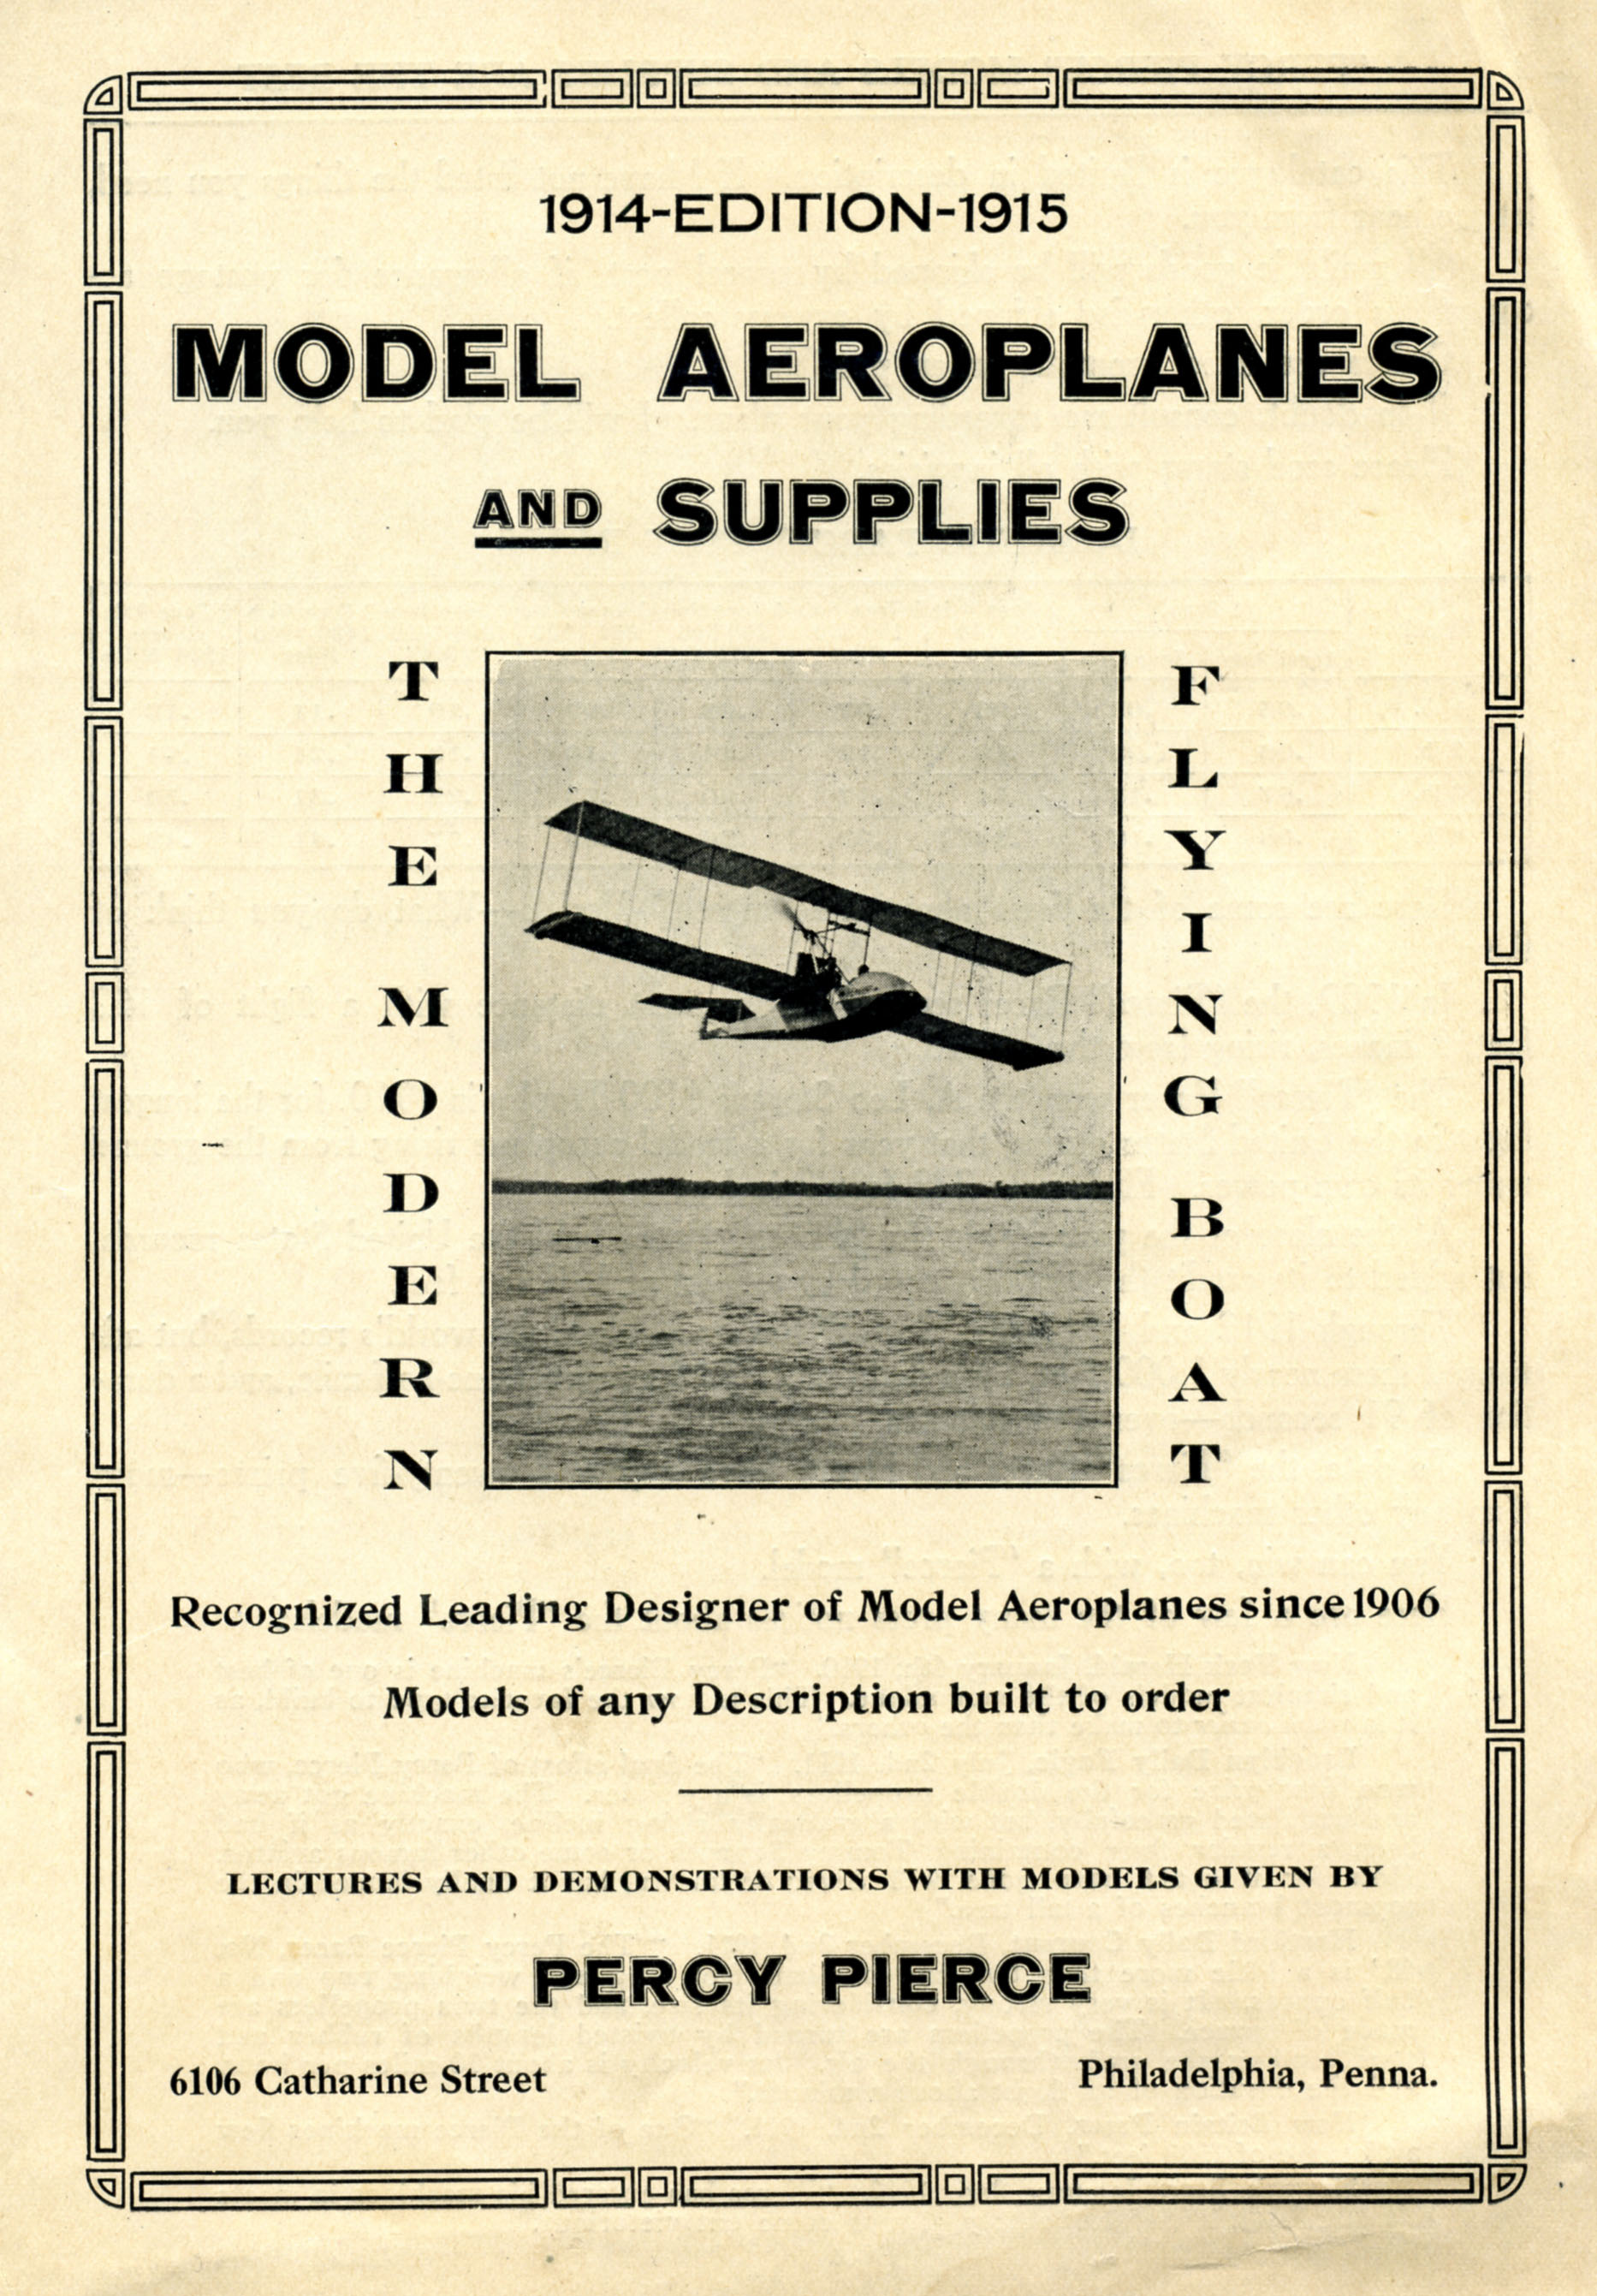 Catalog, Model Aeroplanes and Supplies, 1914-1915. (Source: National Model Aviation Museum Archives, Michael Fulmer Collection #0158)